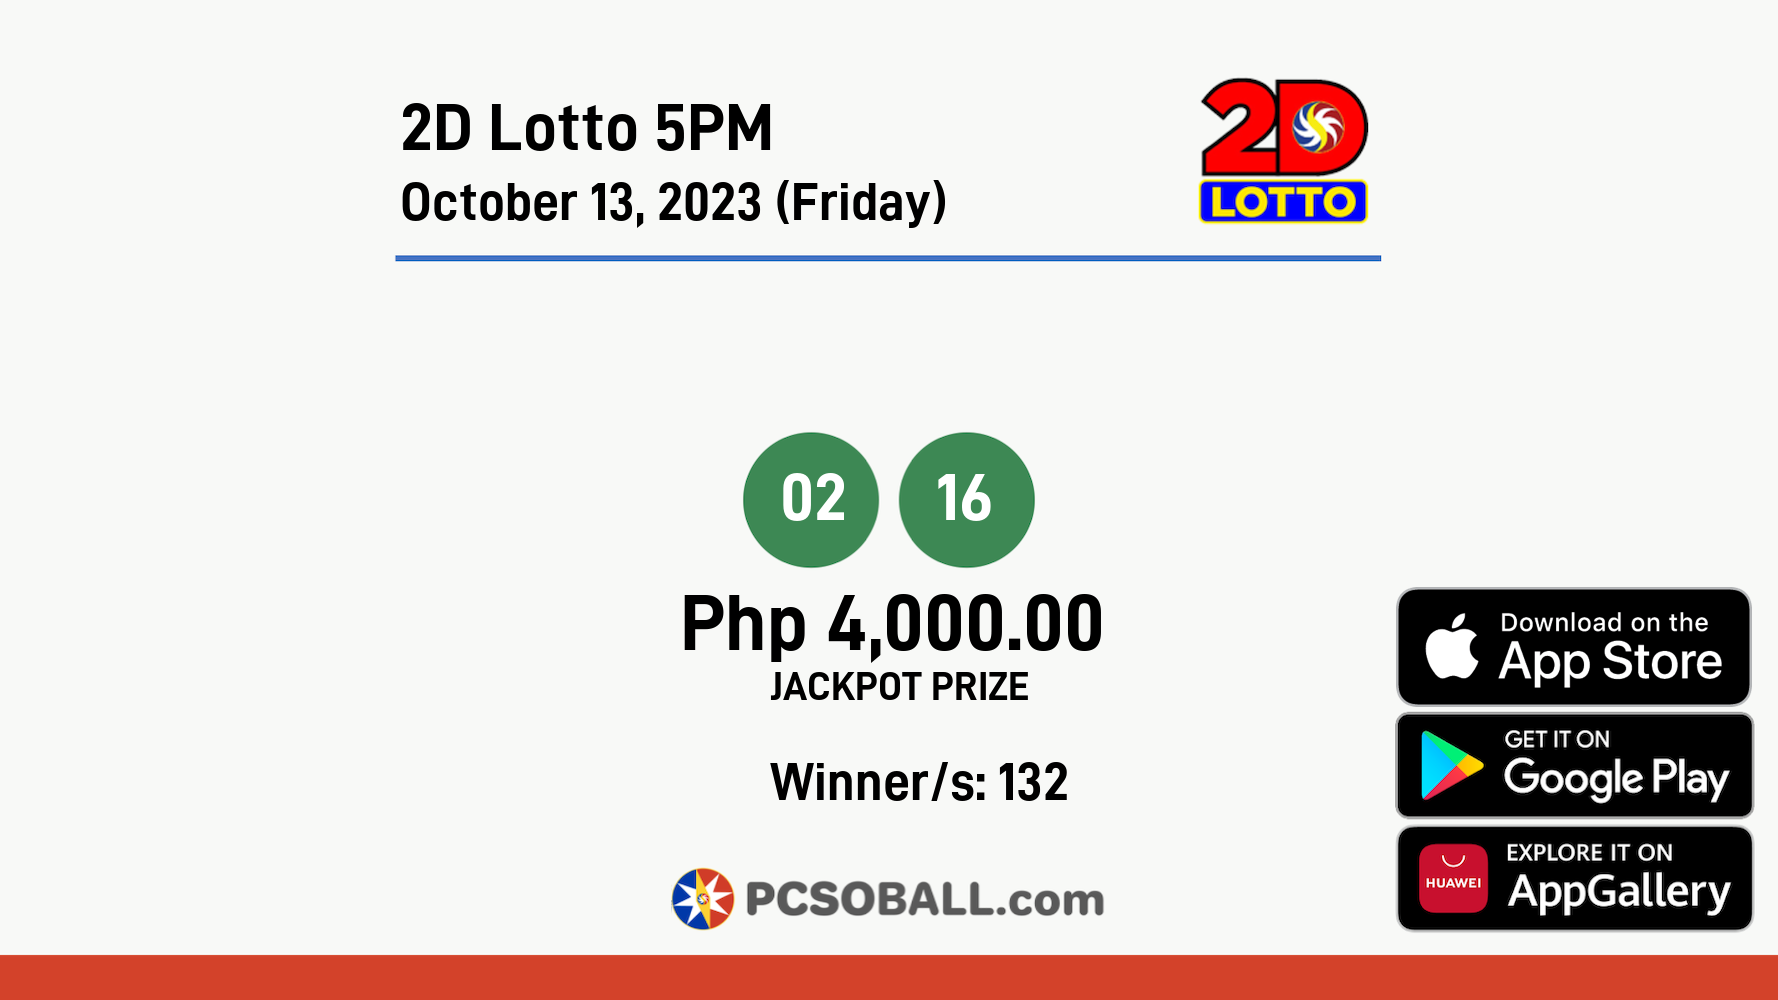 2D Lotto 5PM October 13, 2023 (Friday) Result